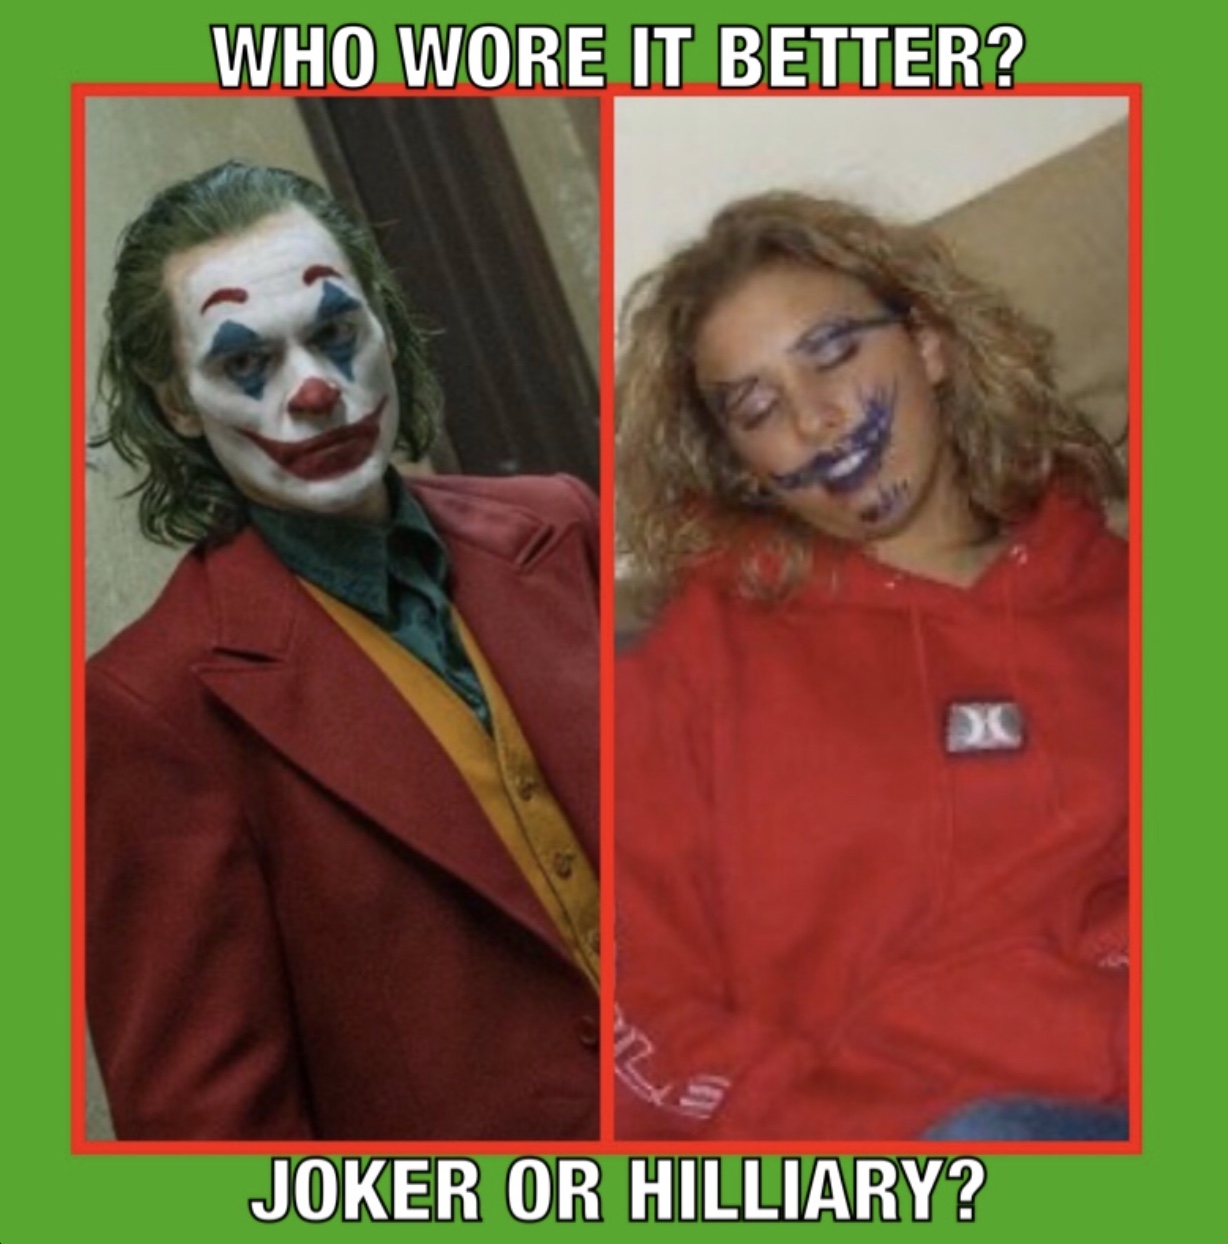 Who Wore It Better? Joker Or Hilliary?